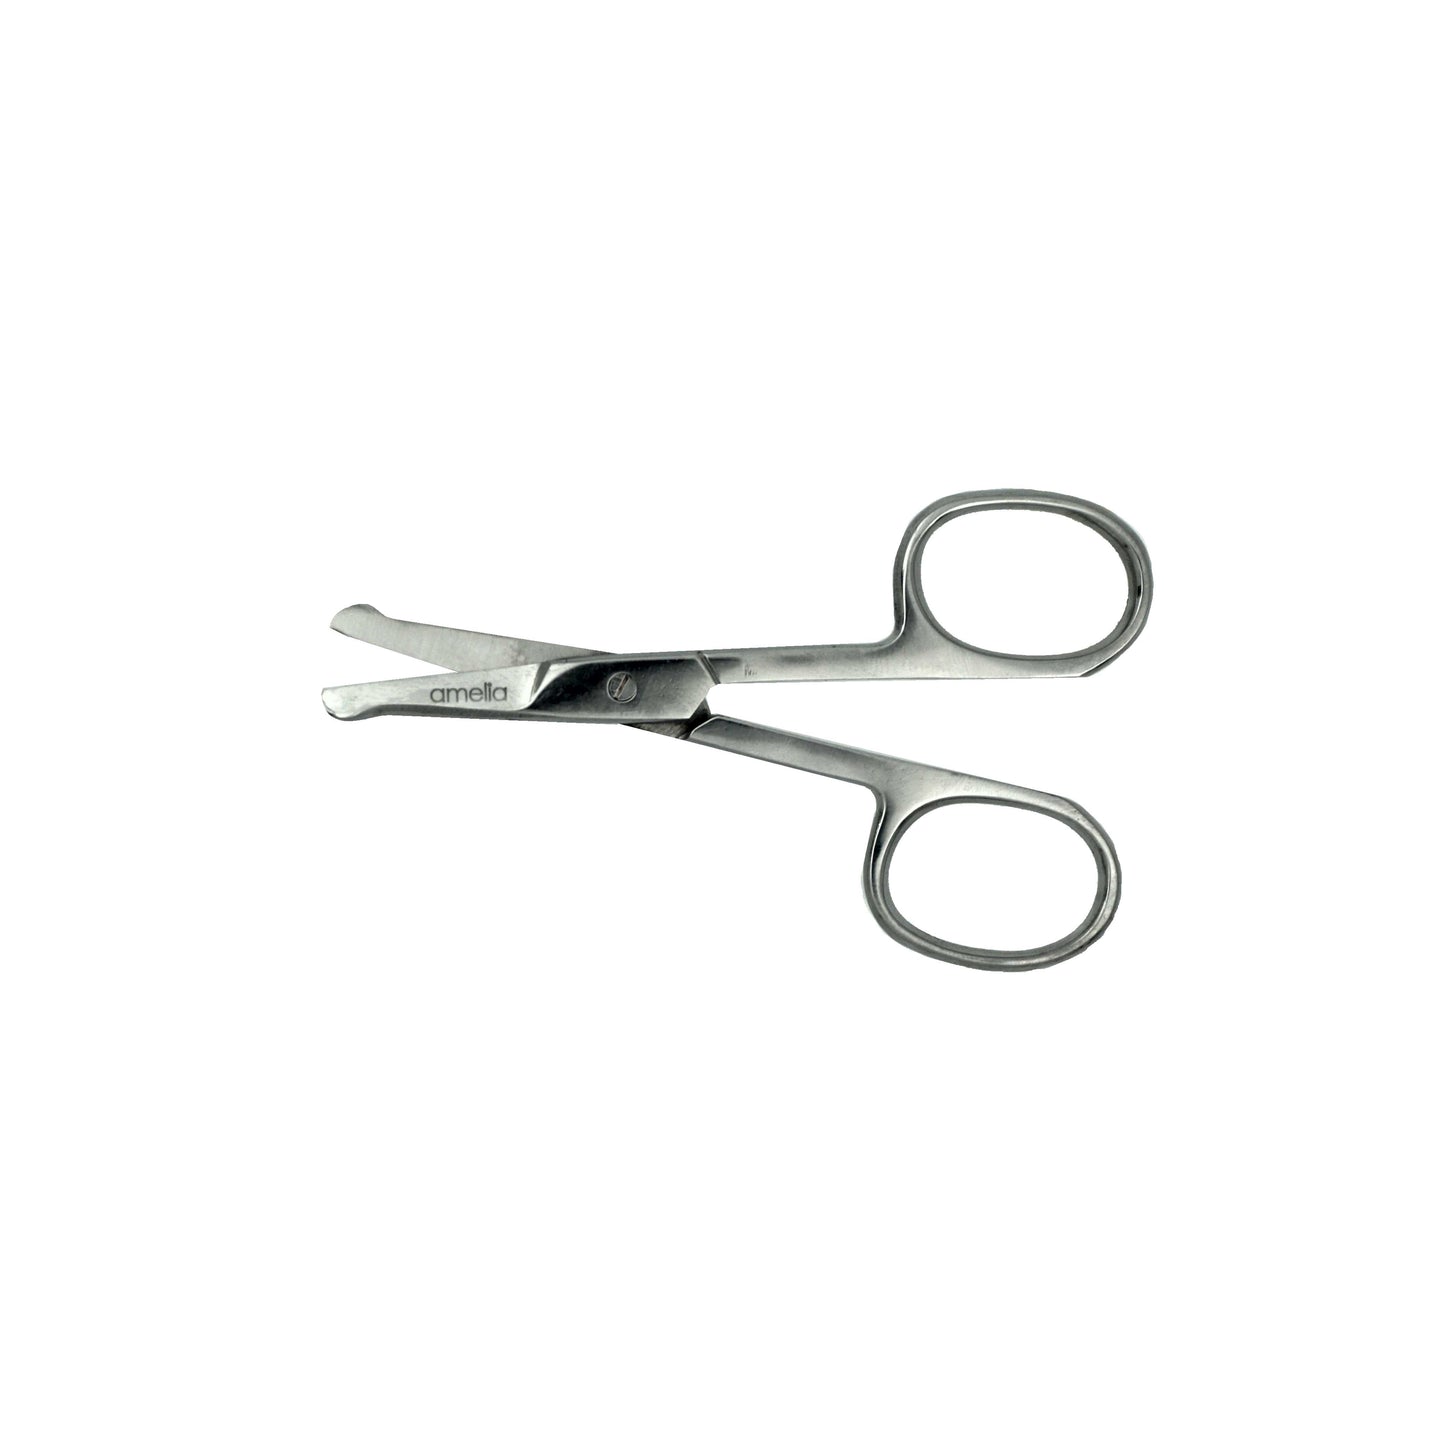 3.75" Right Handed, Stainless Steel Personal Trimming Safety Shear